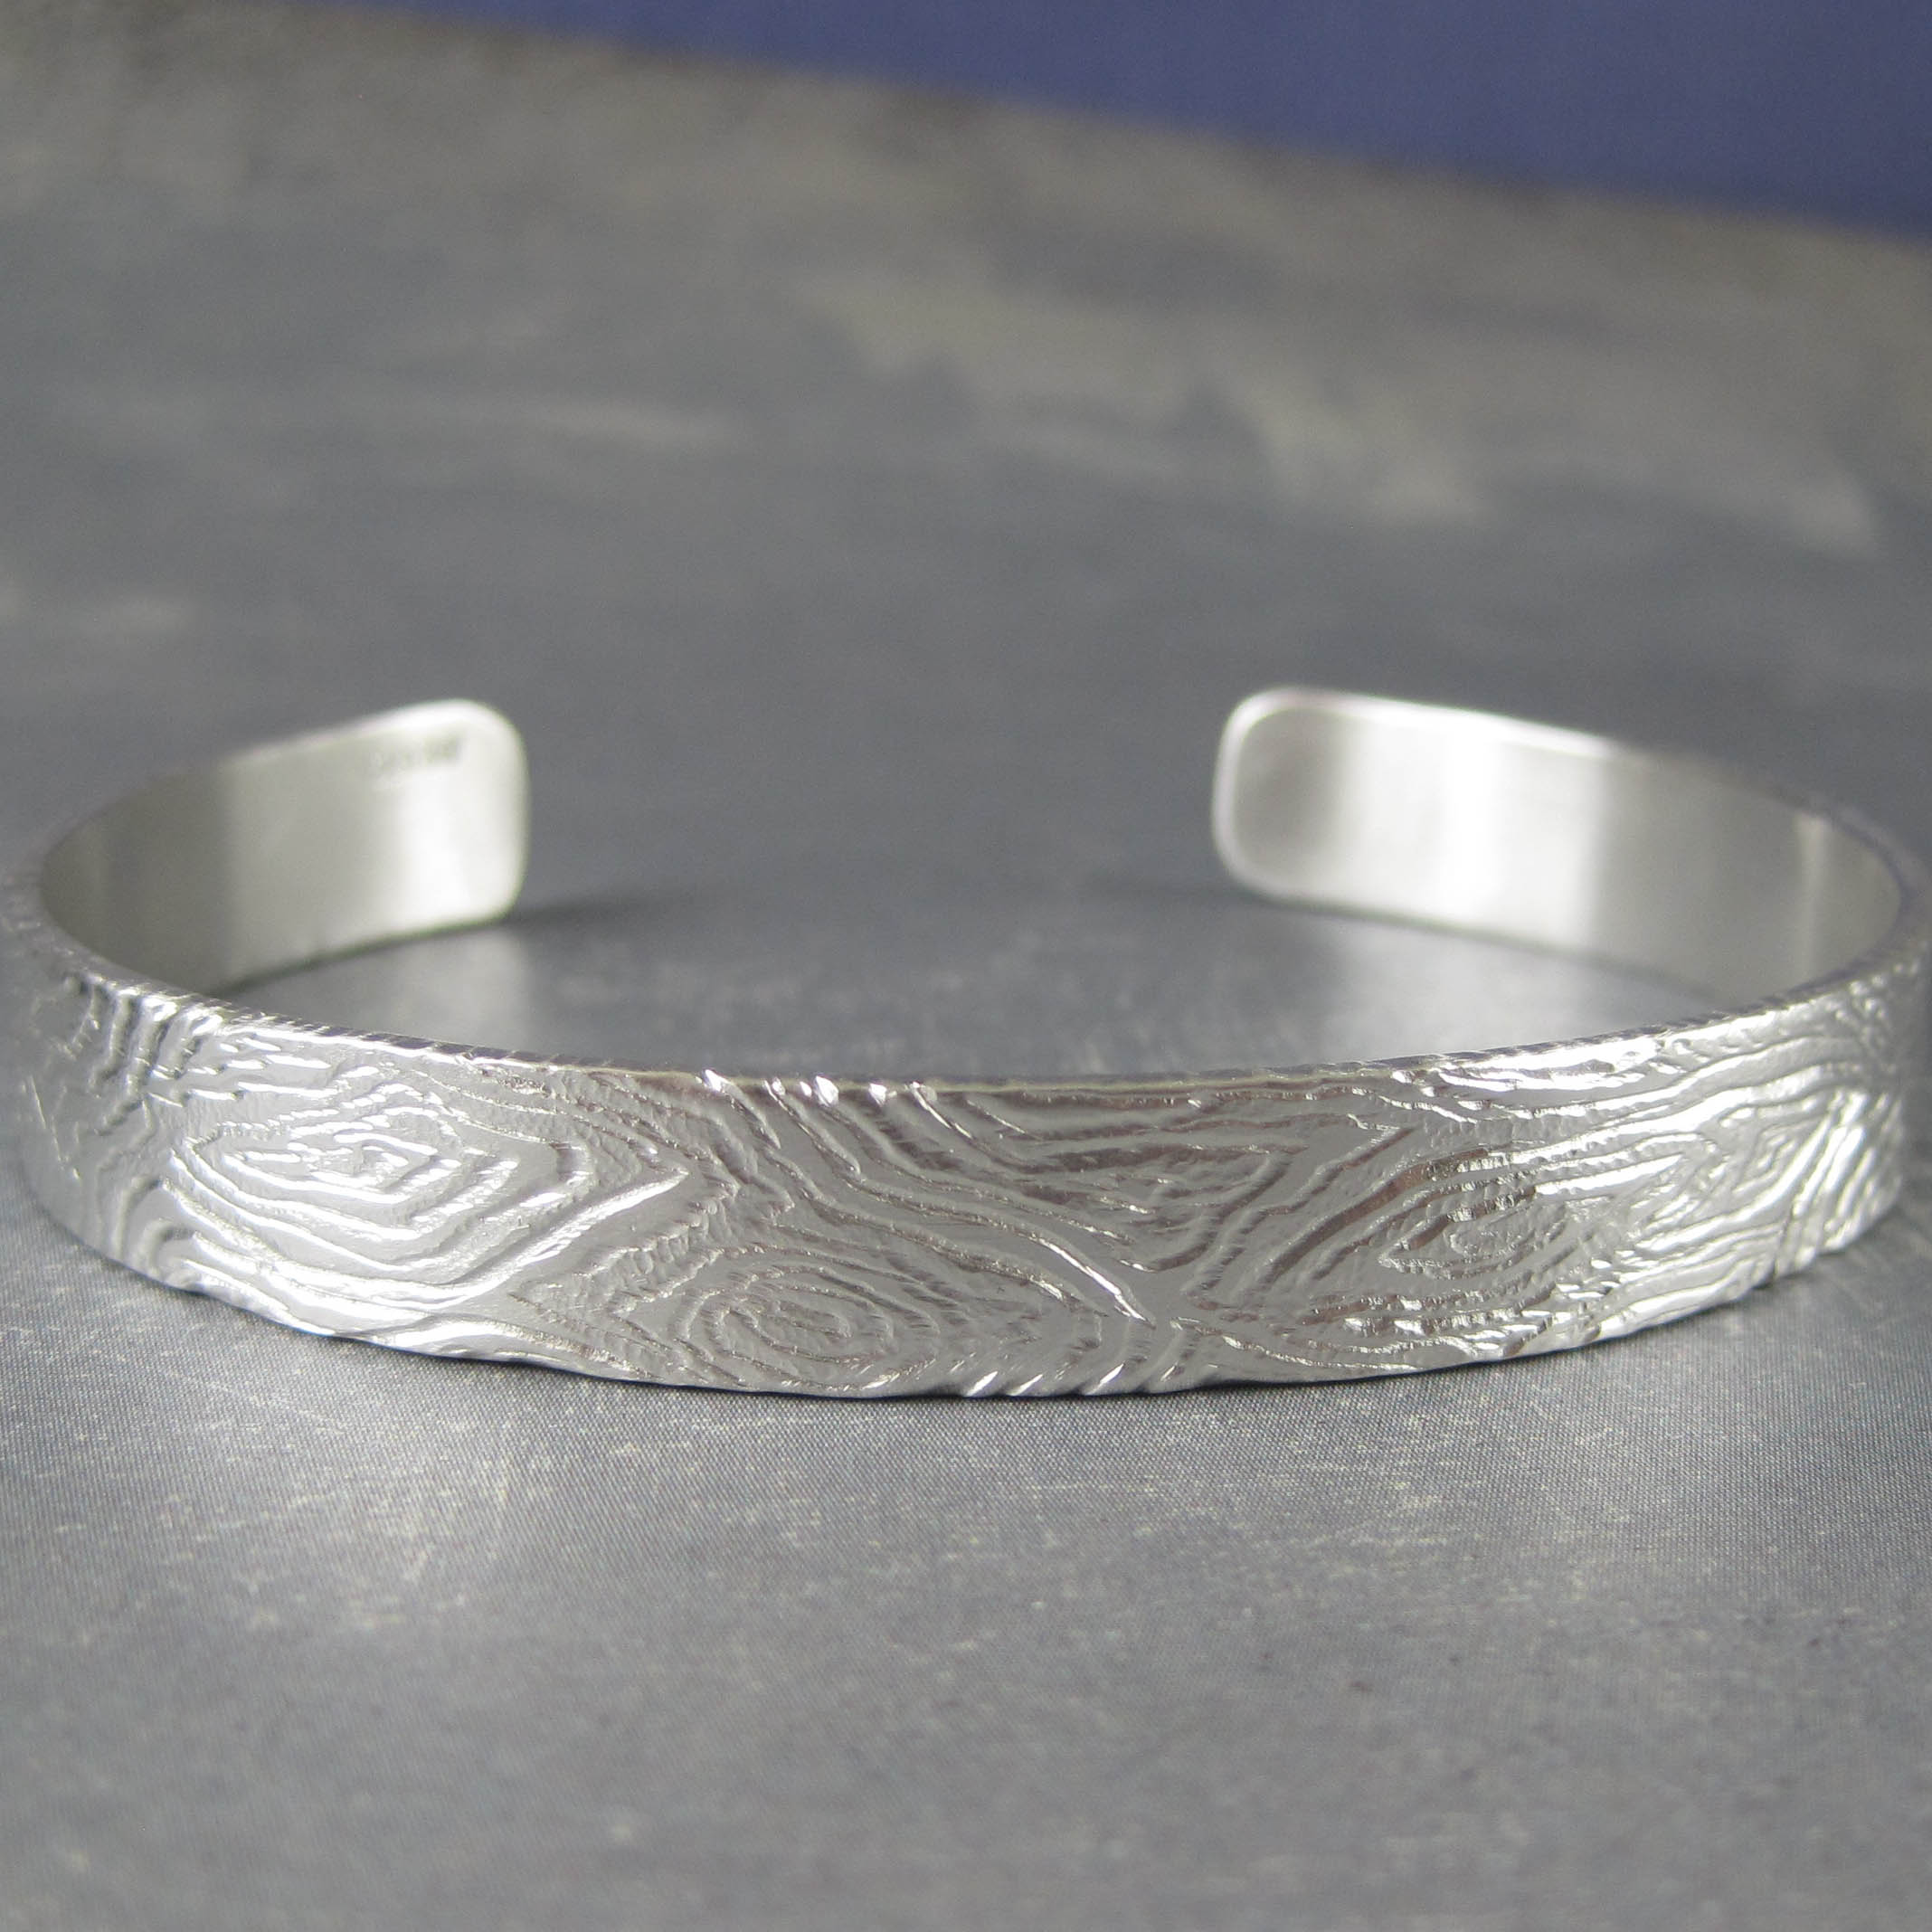 Unique carved sterling silver cuff bracelet with a wood pattern